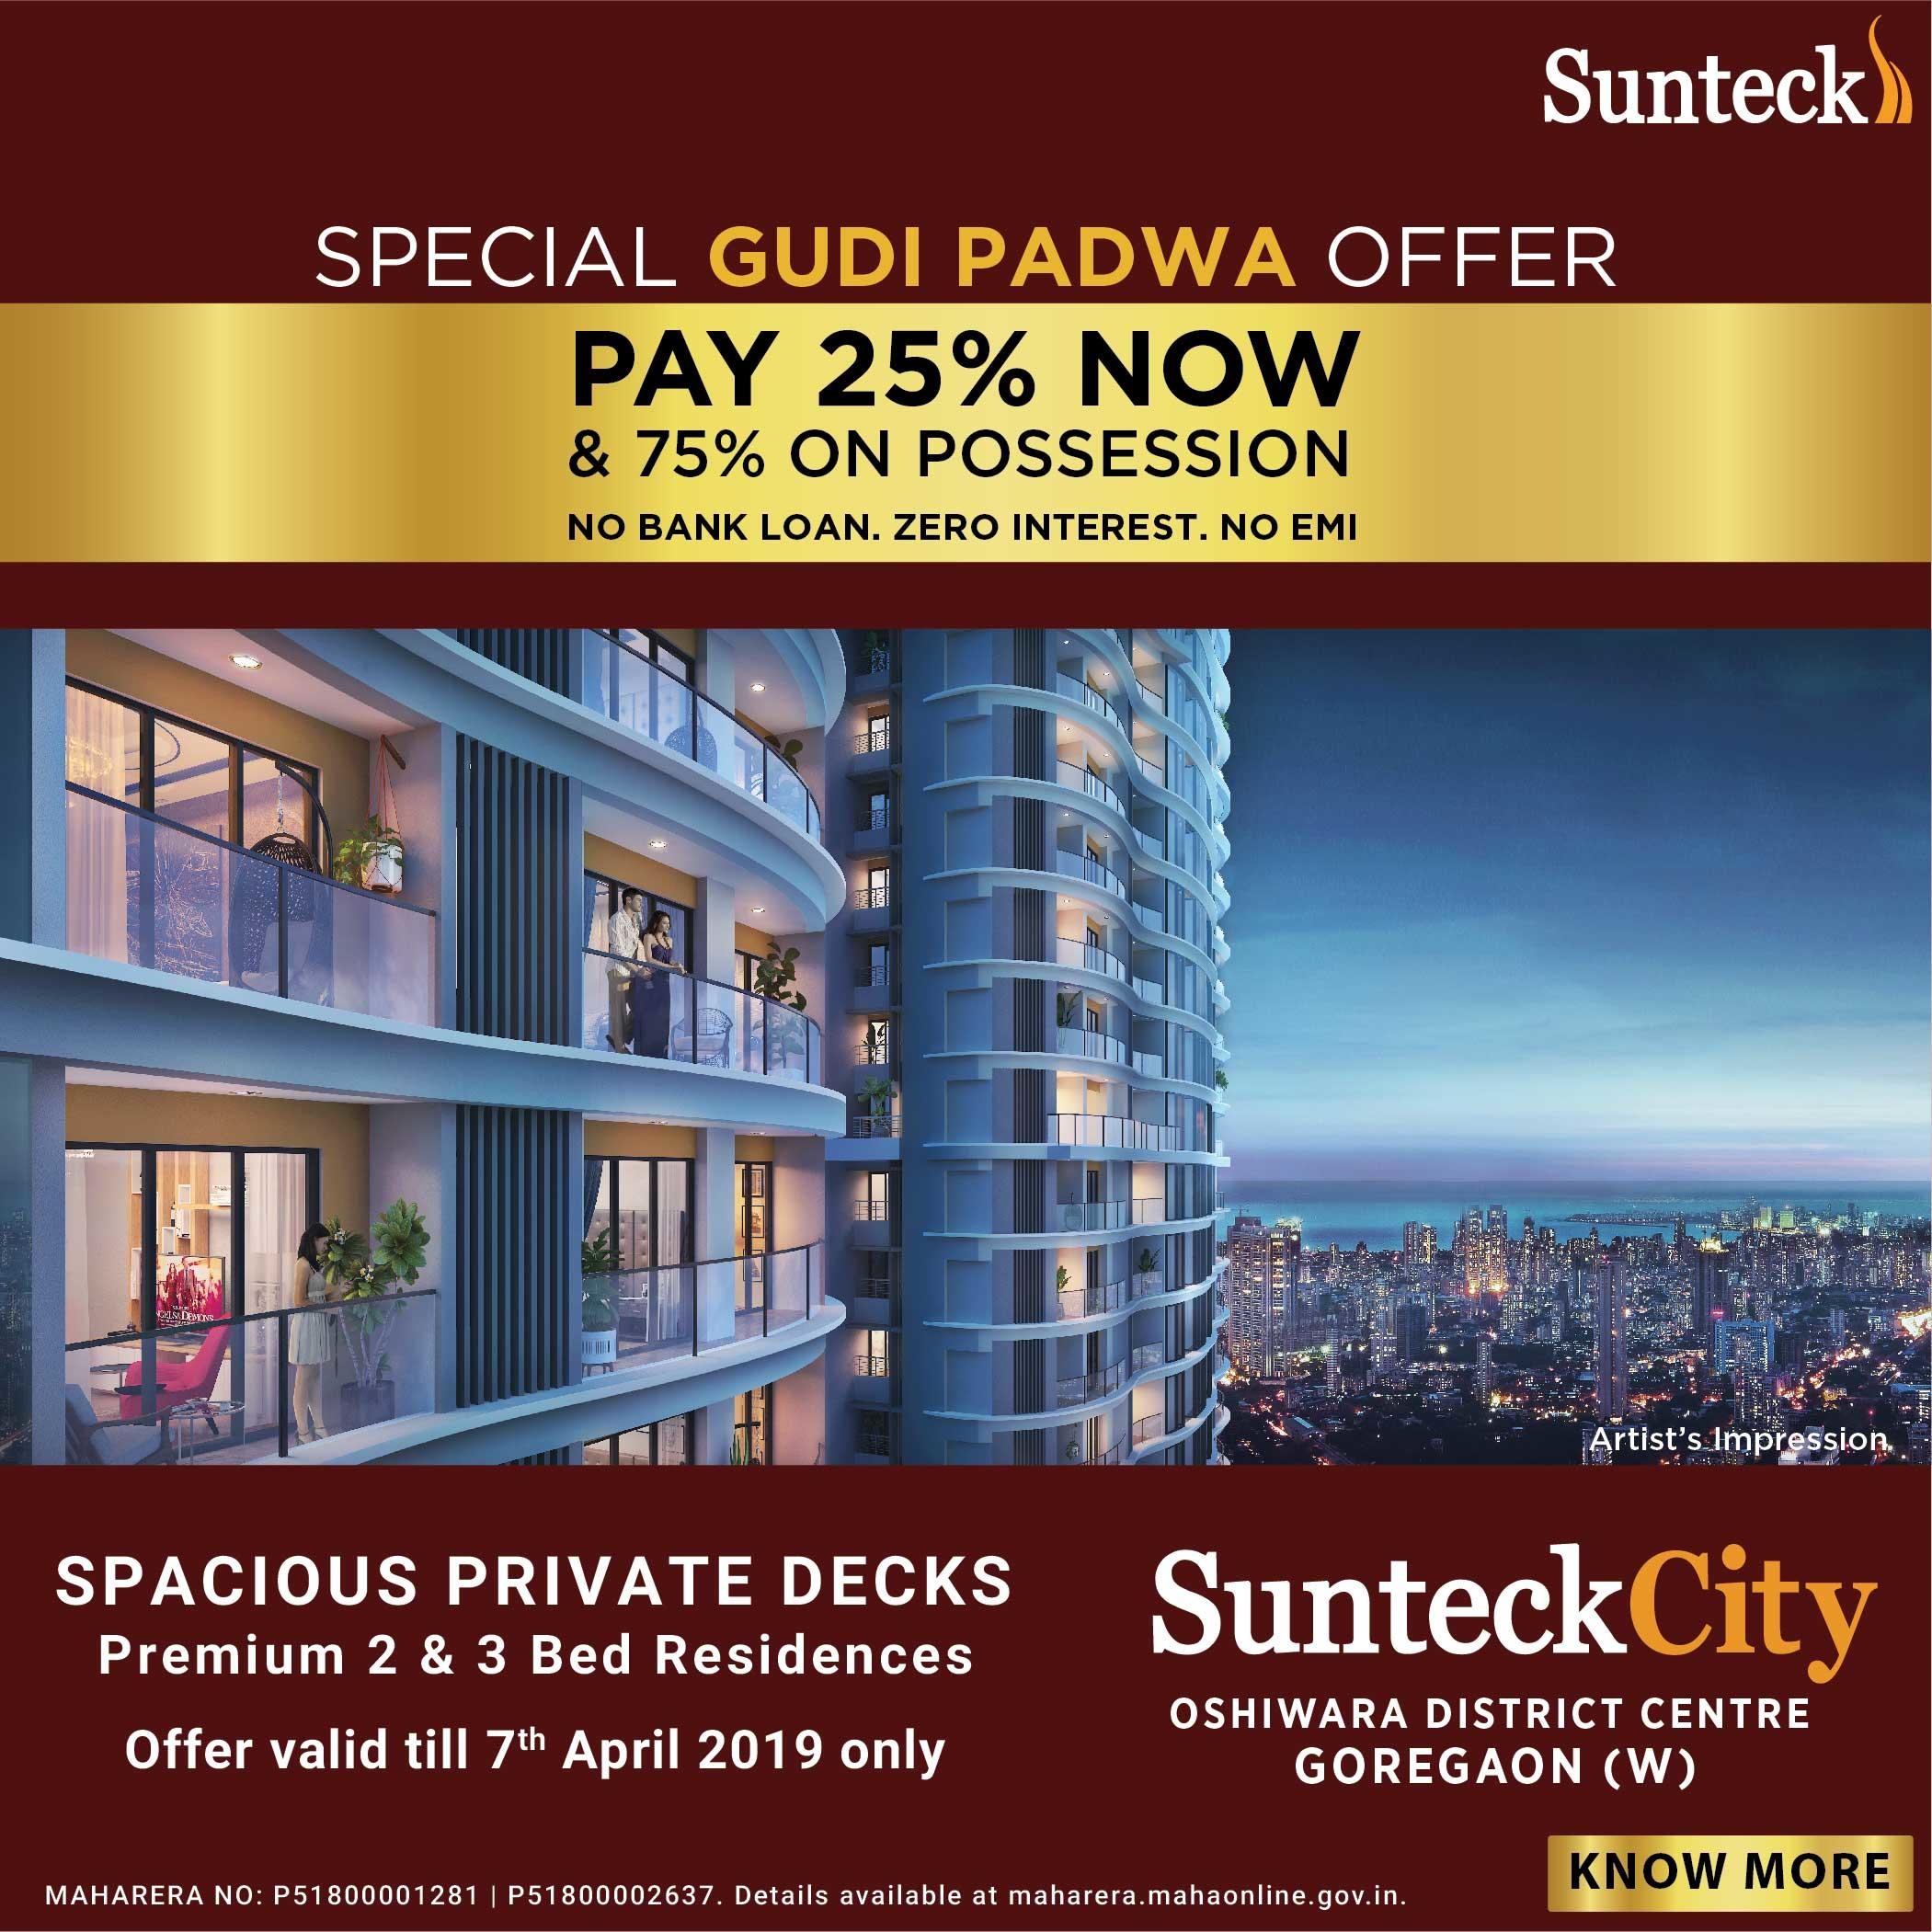 Special Guddi Padwa offer pay 25% now & 75% on possession at Sunteck City in Mumbai Update